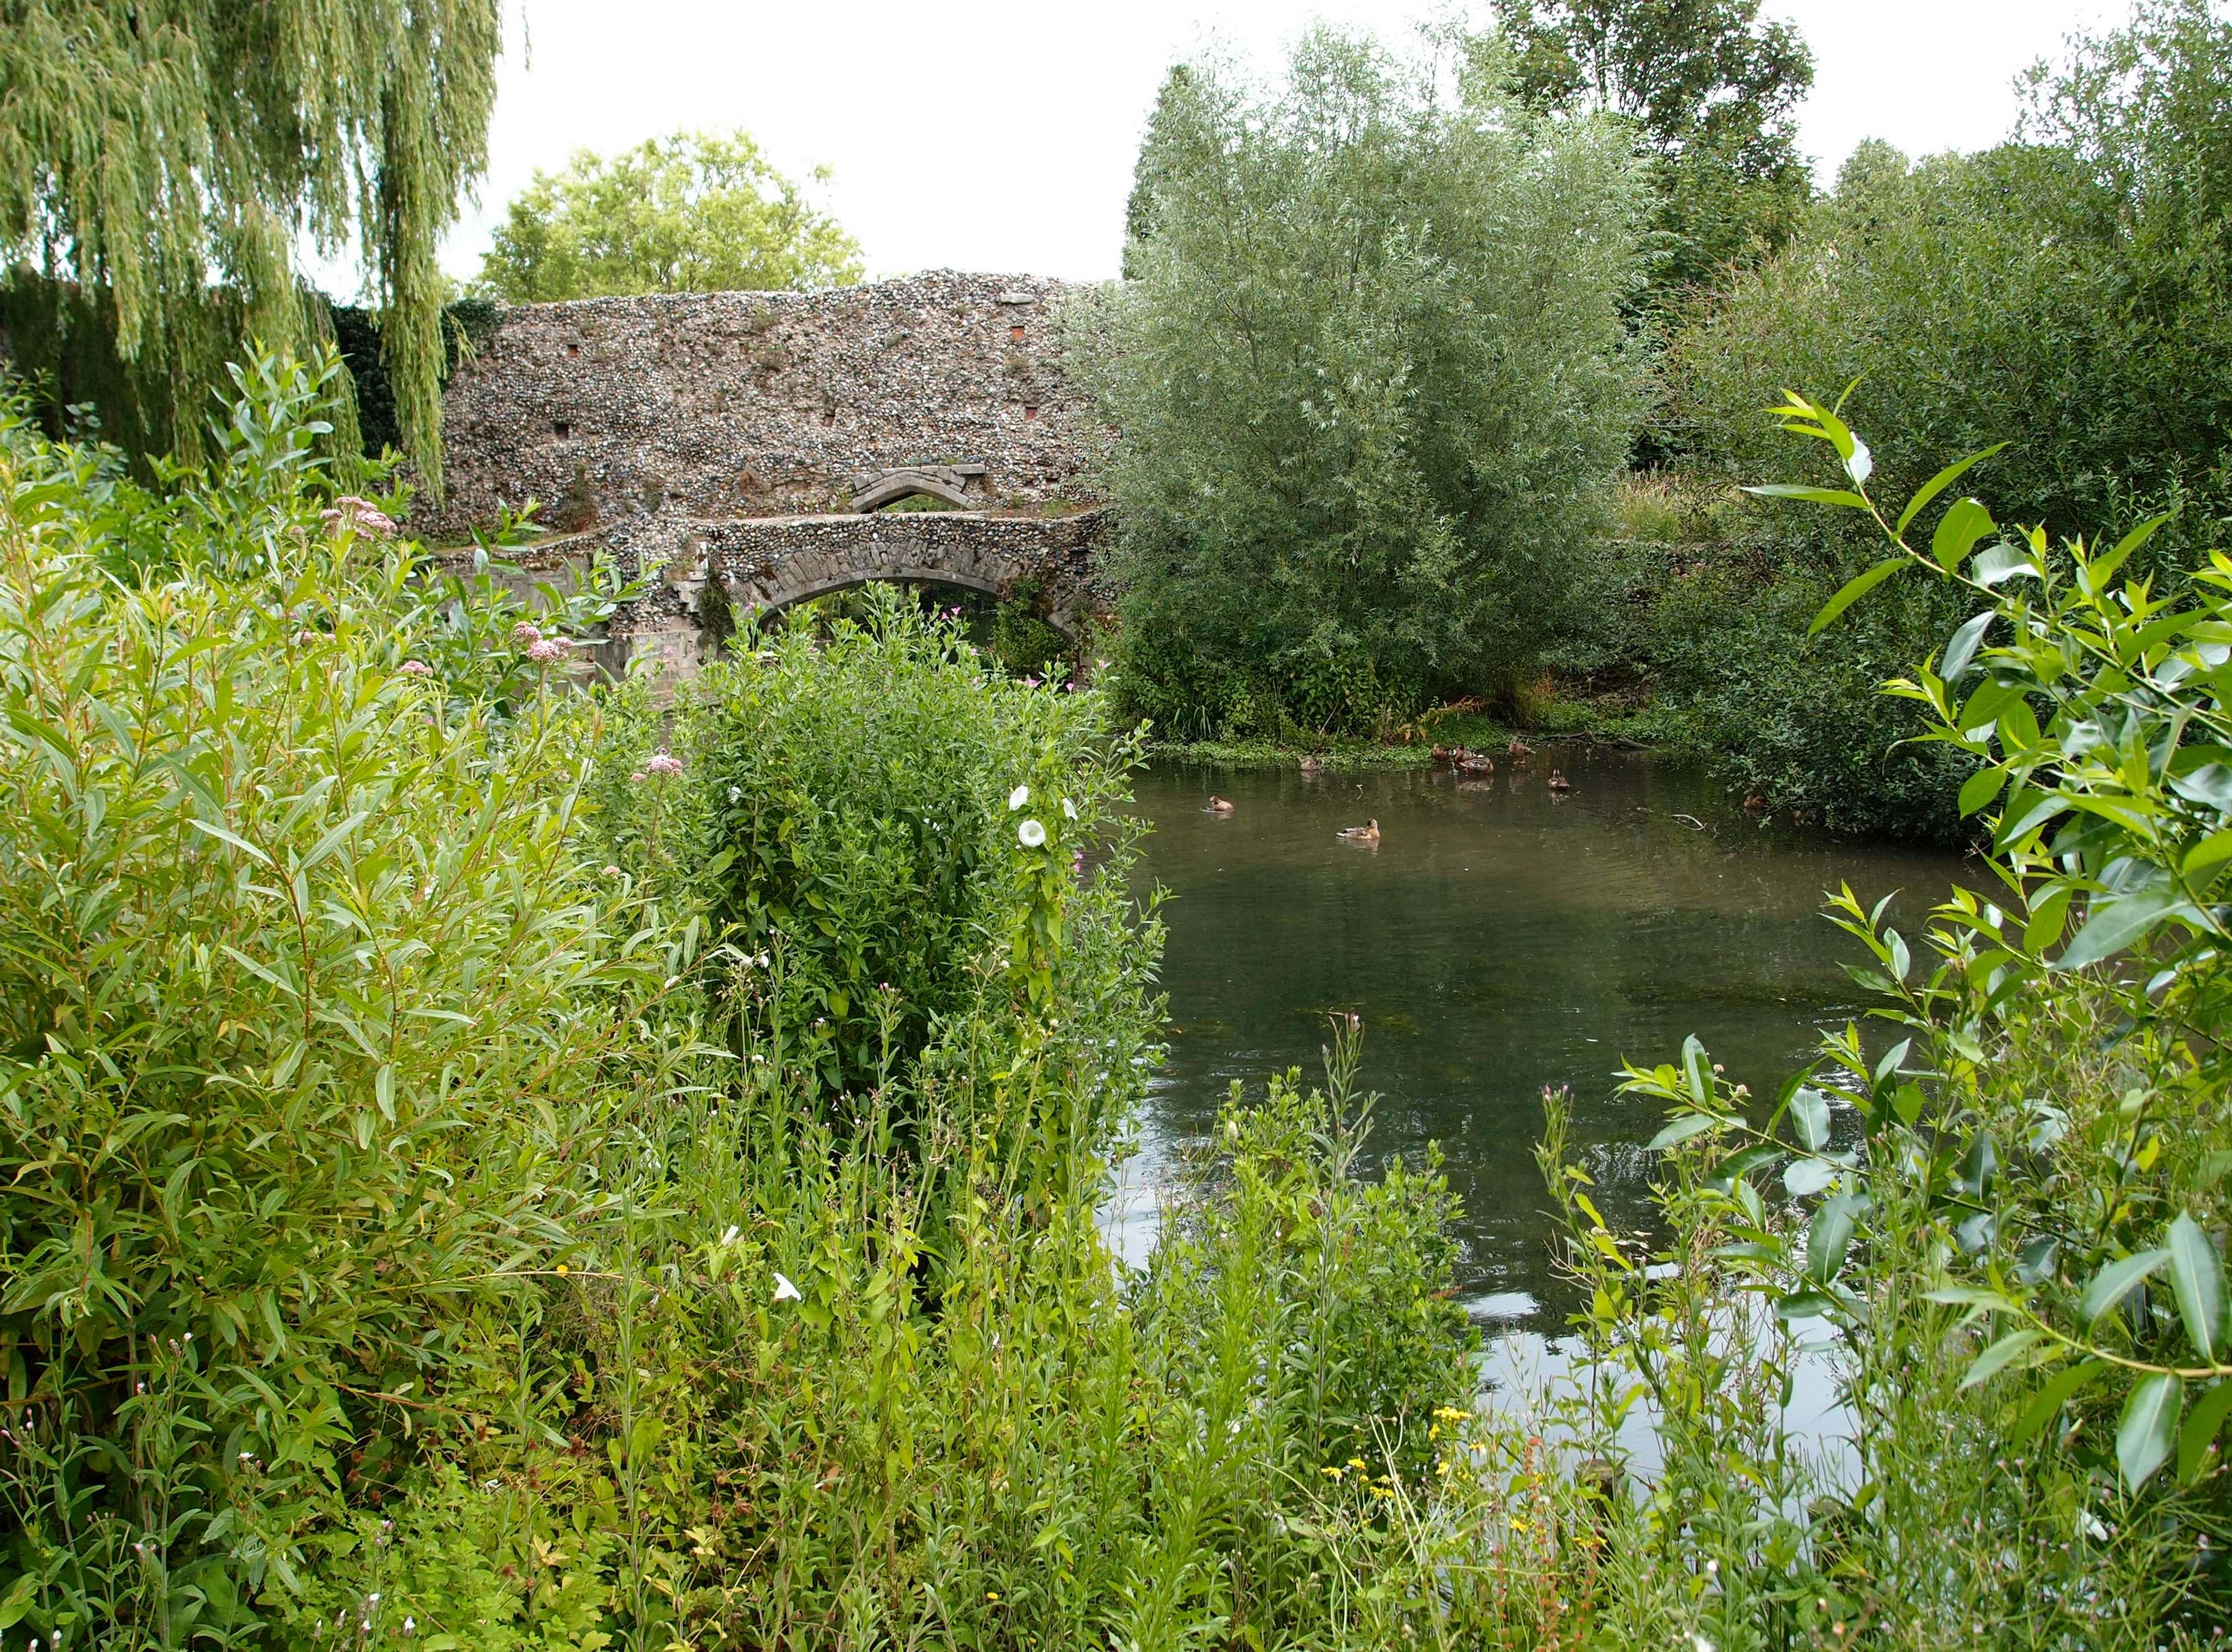 Photo of a river in Lark, in Cam and Ely Ouse catchment